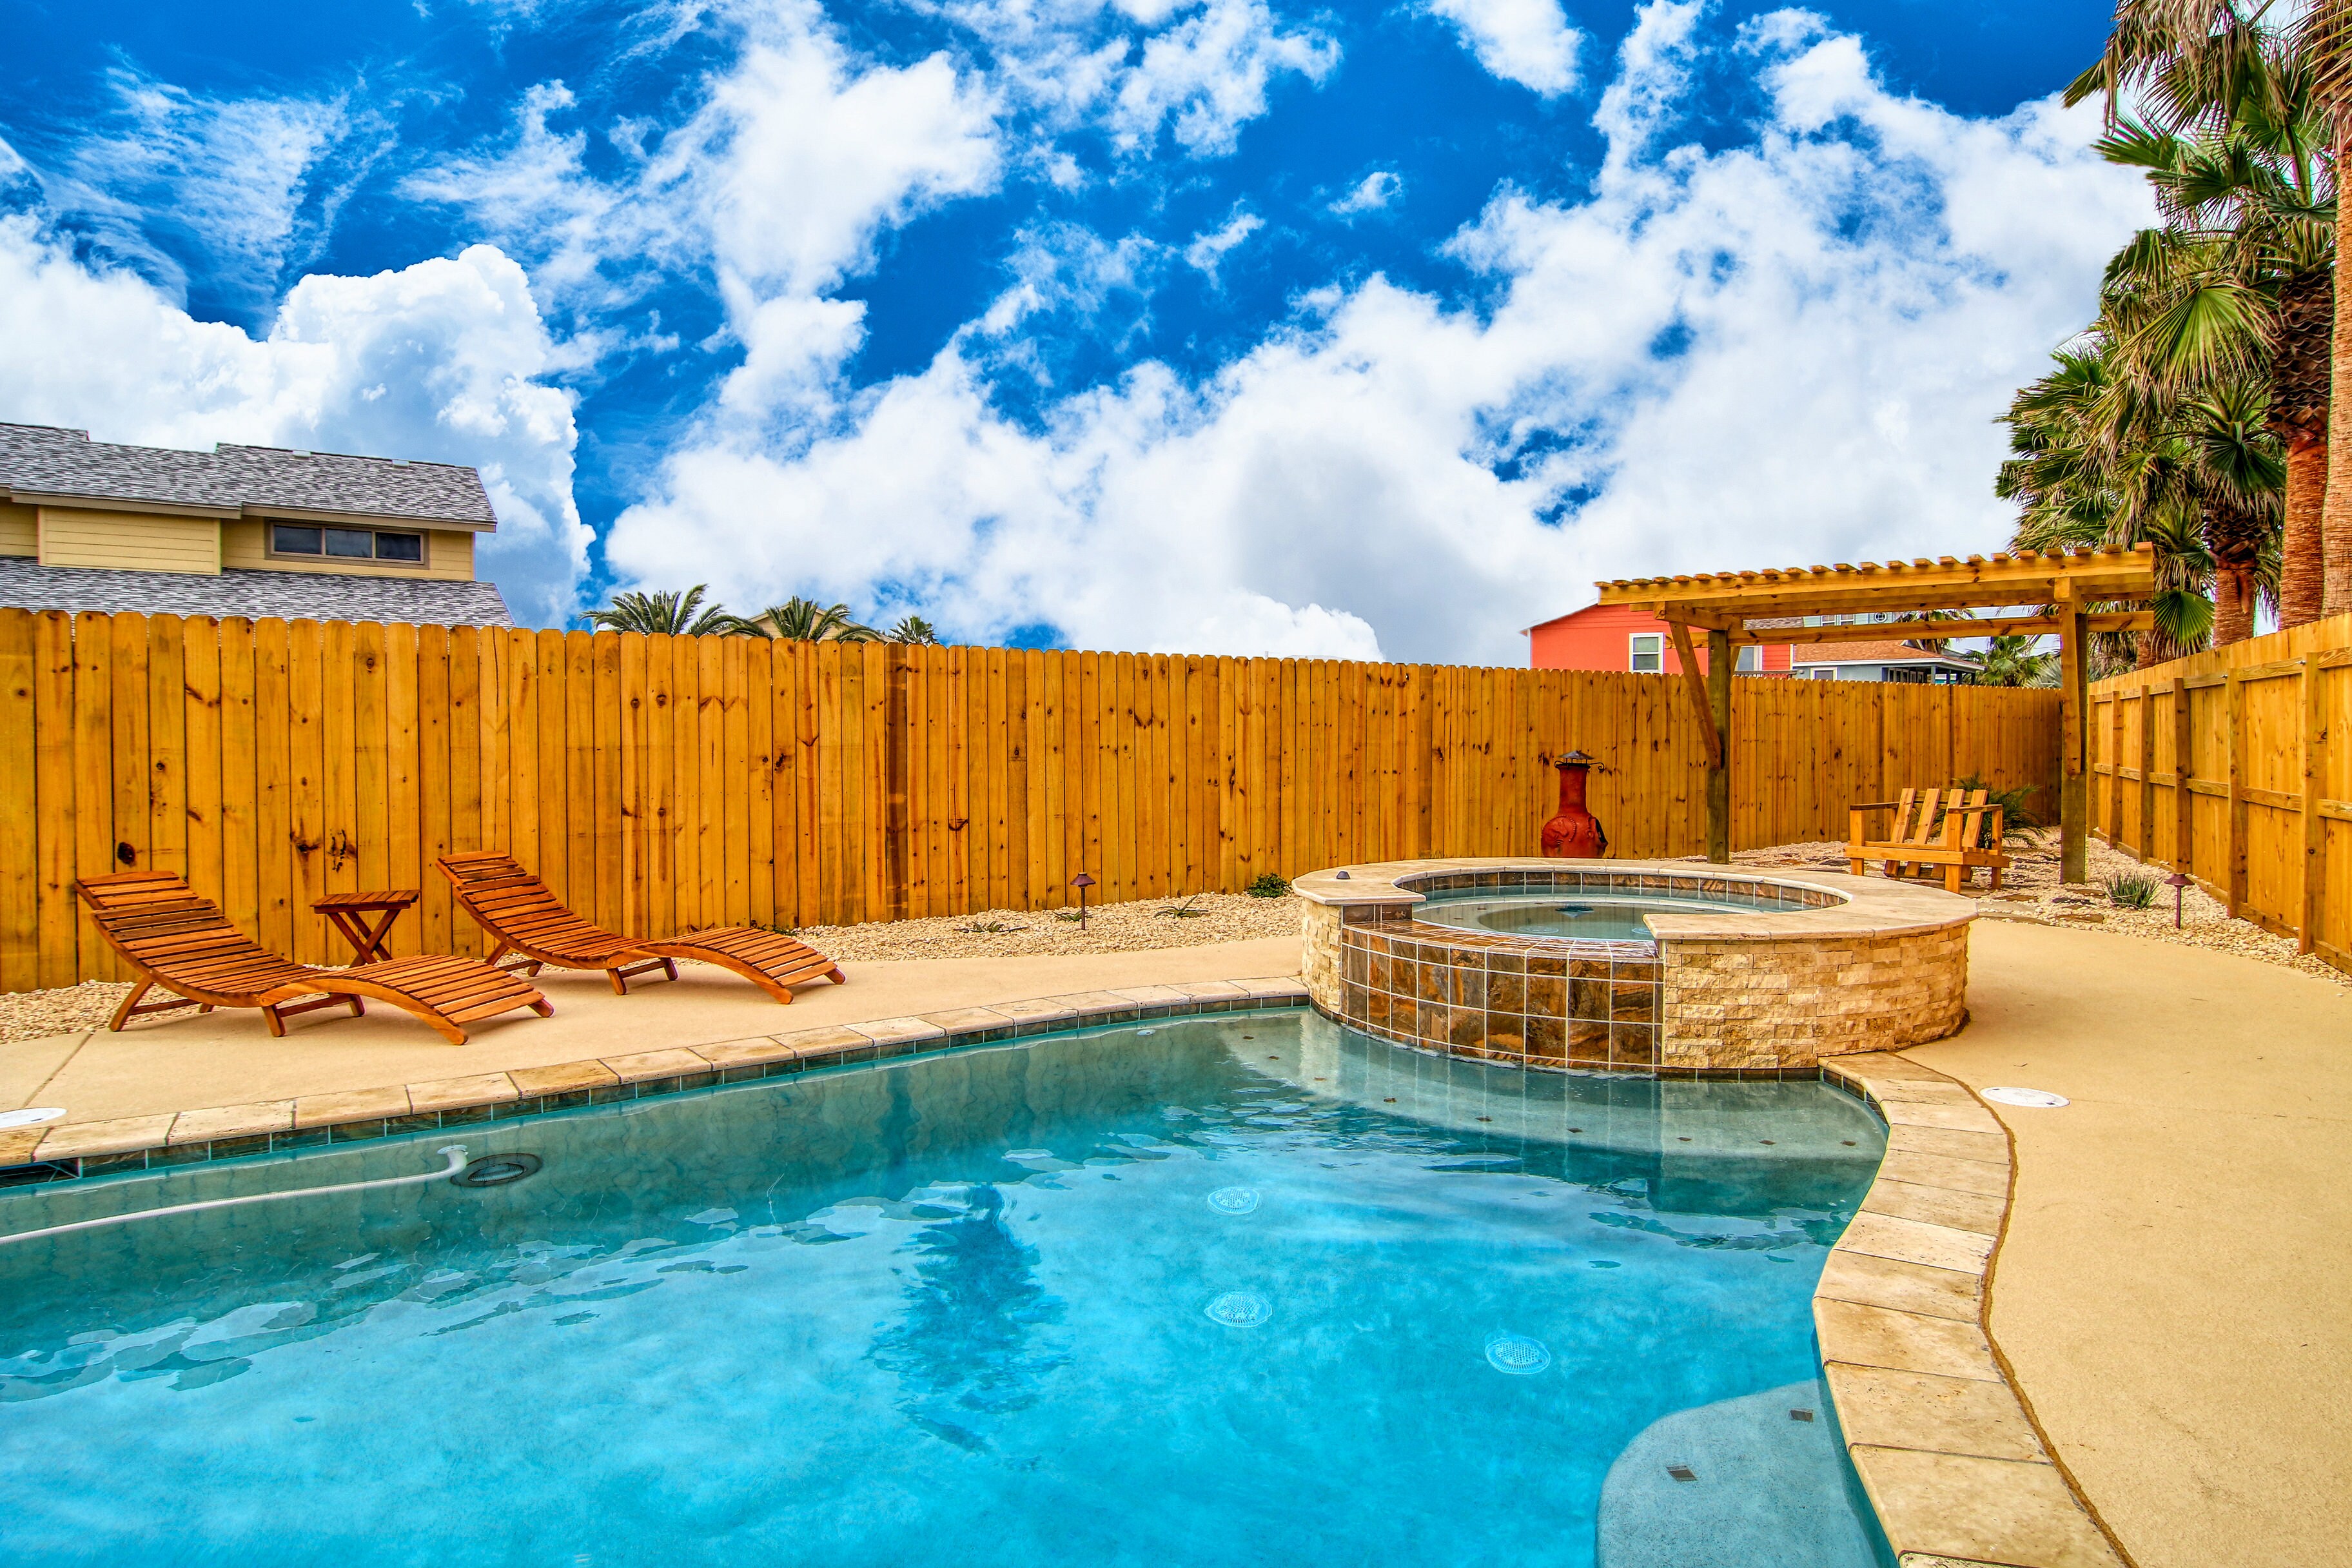 Private swimming pool and hot tub. Private lighted swimming pool.